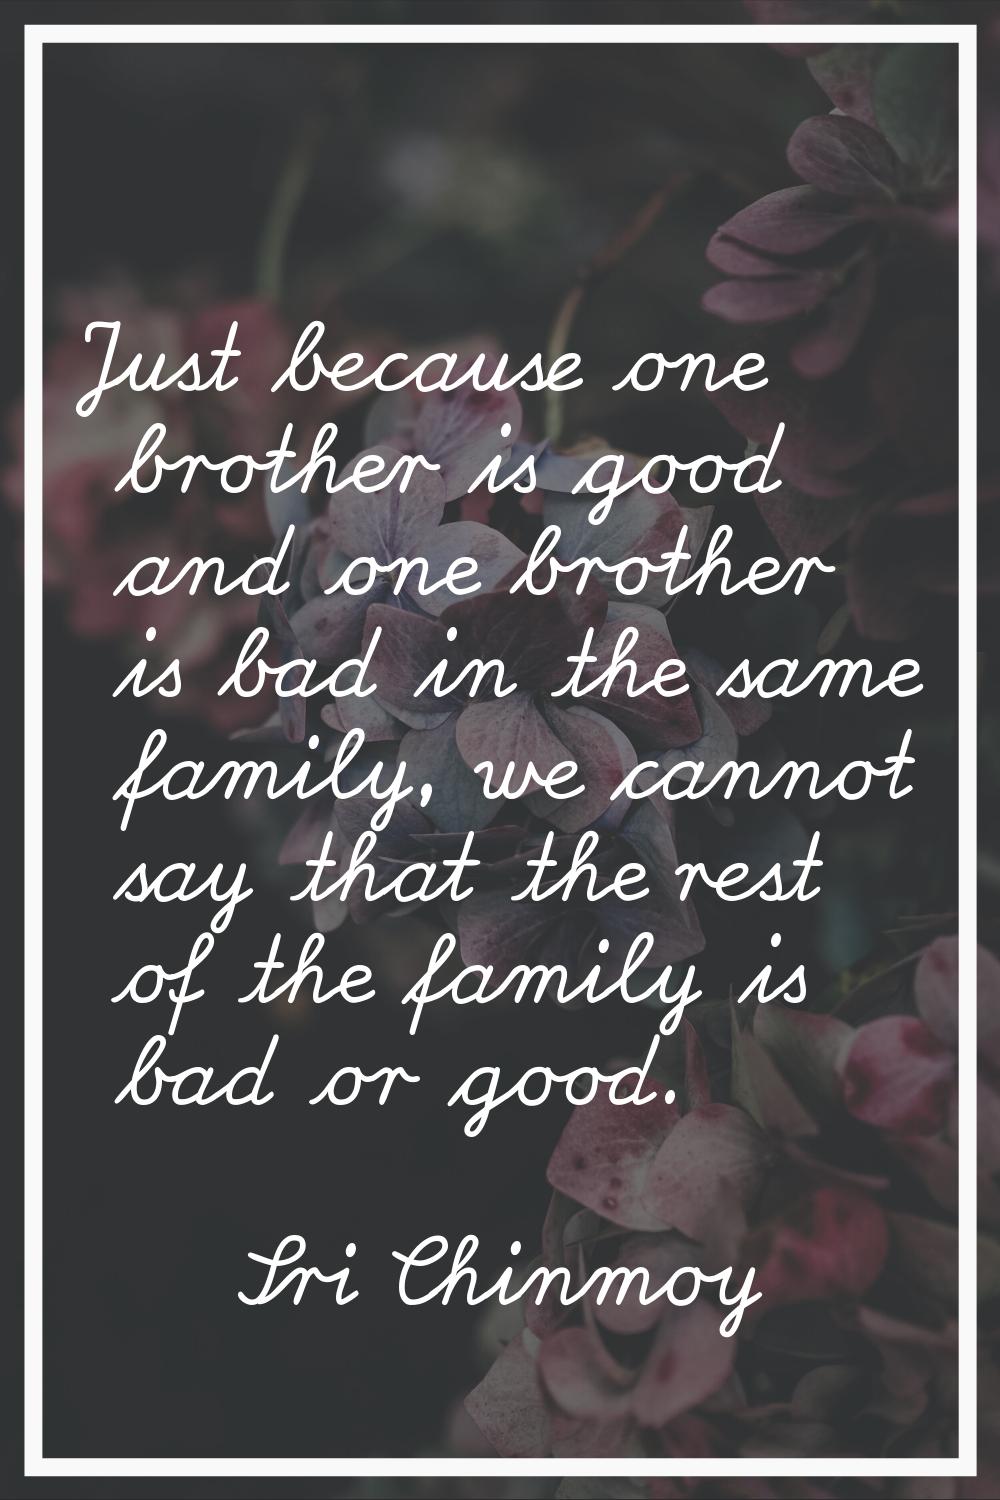 Just because one brother is good and one brother is bad in the same family, we cannot say that the 